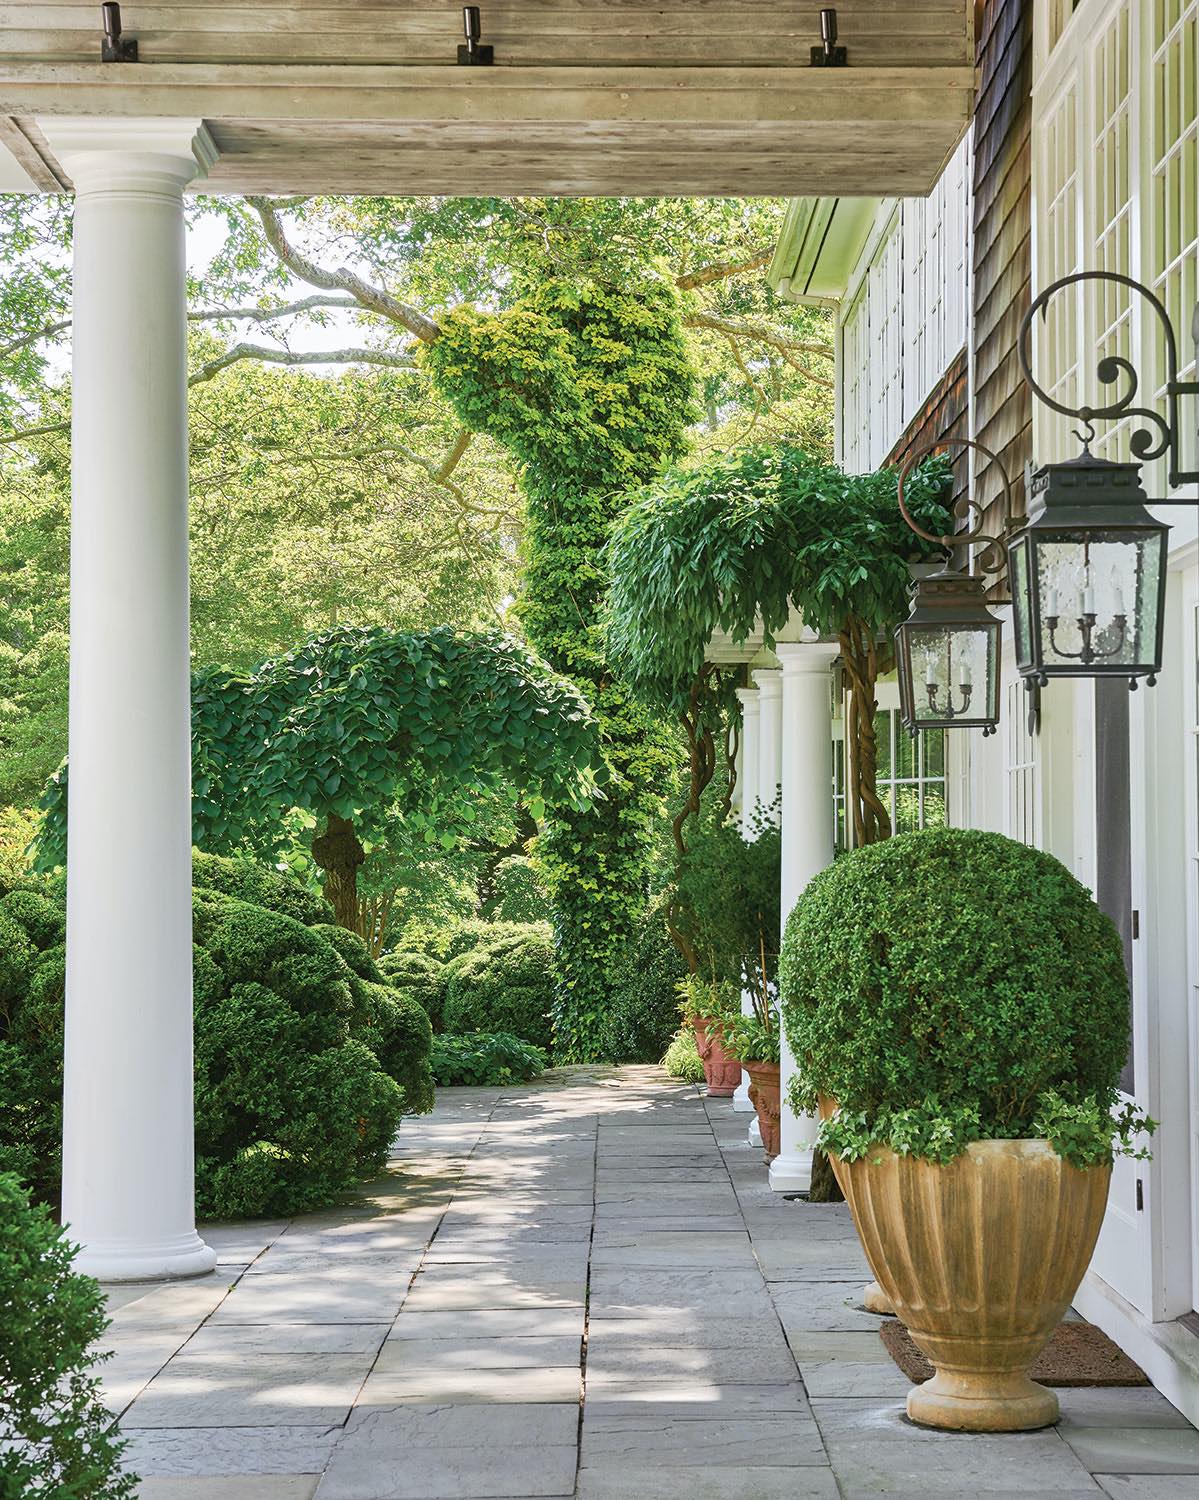 On the terrace, urns of boxwood flank the door to the living room.